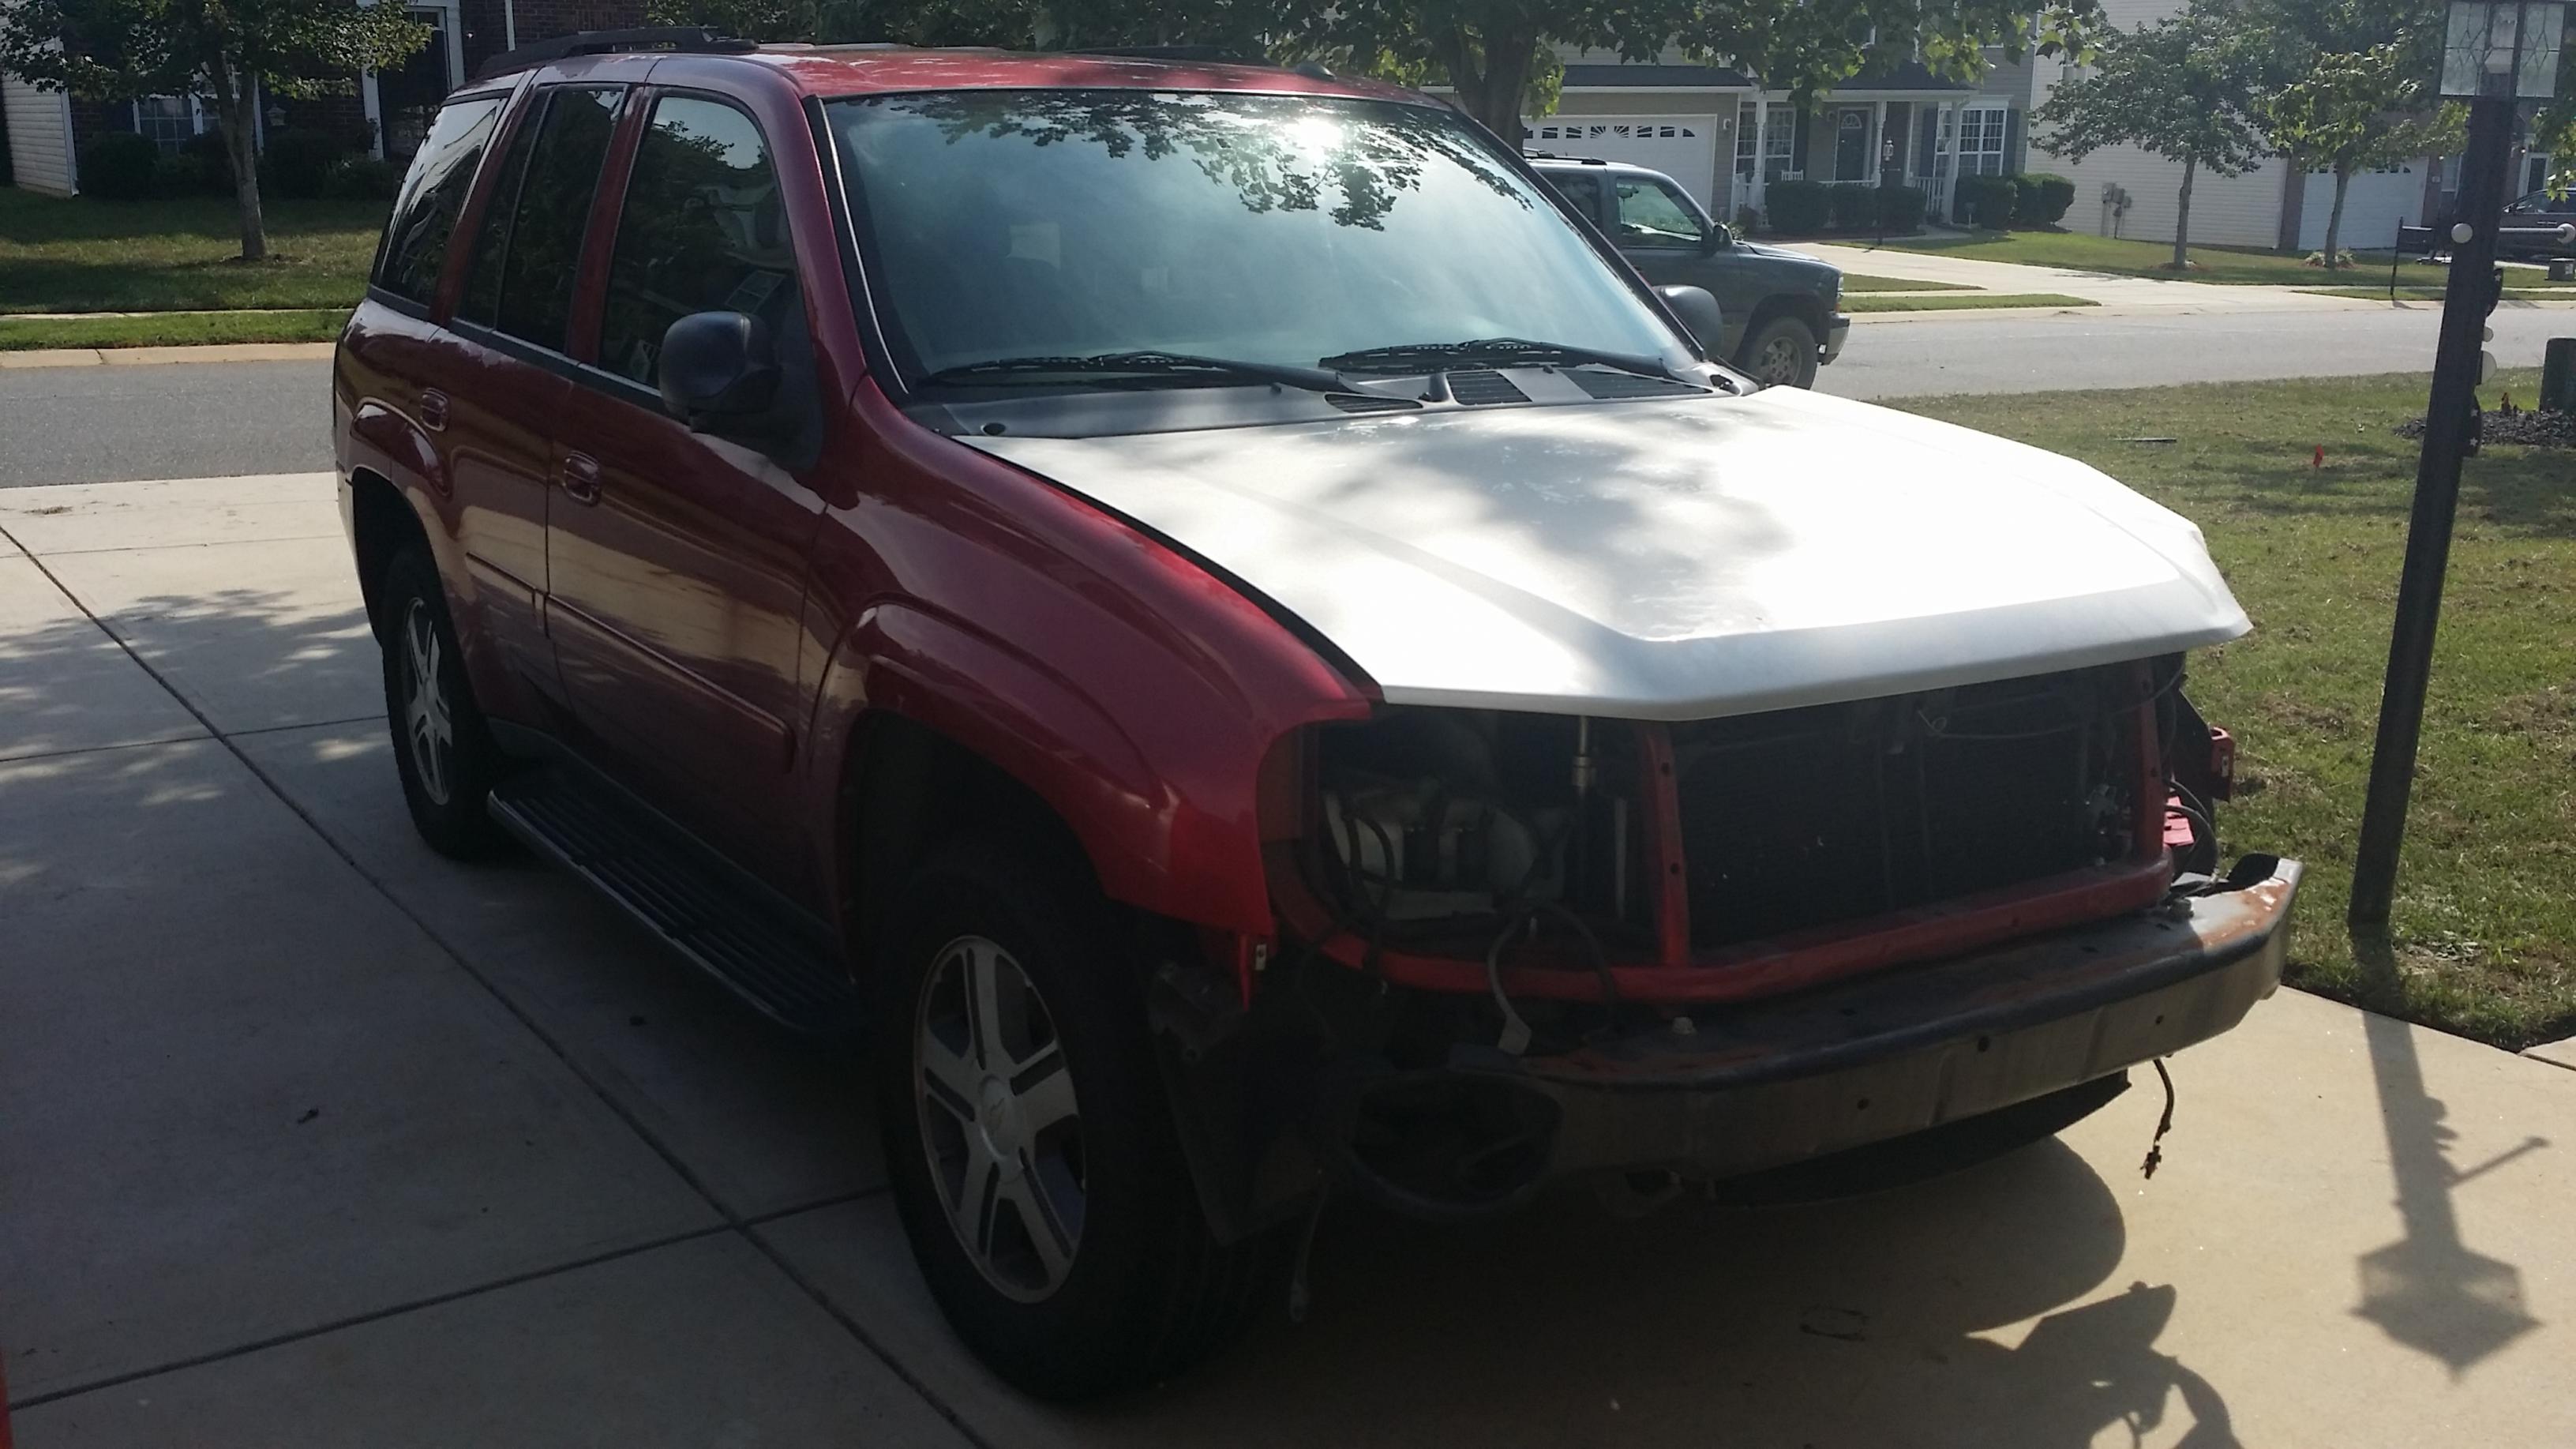 For Sale: 2005 Chevy Trailblazer part out - Chevrolet Forum - Chevy